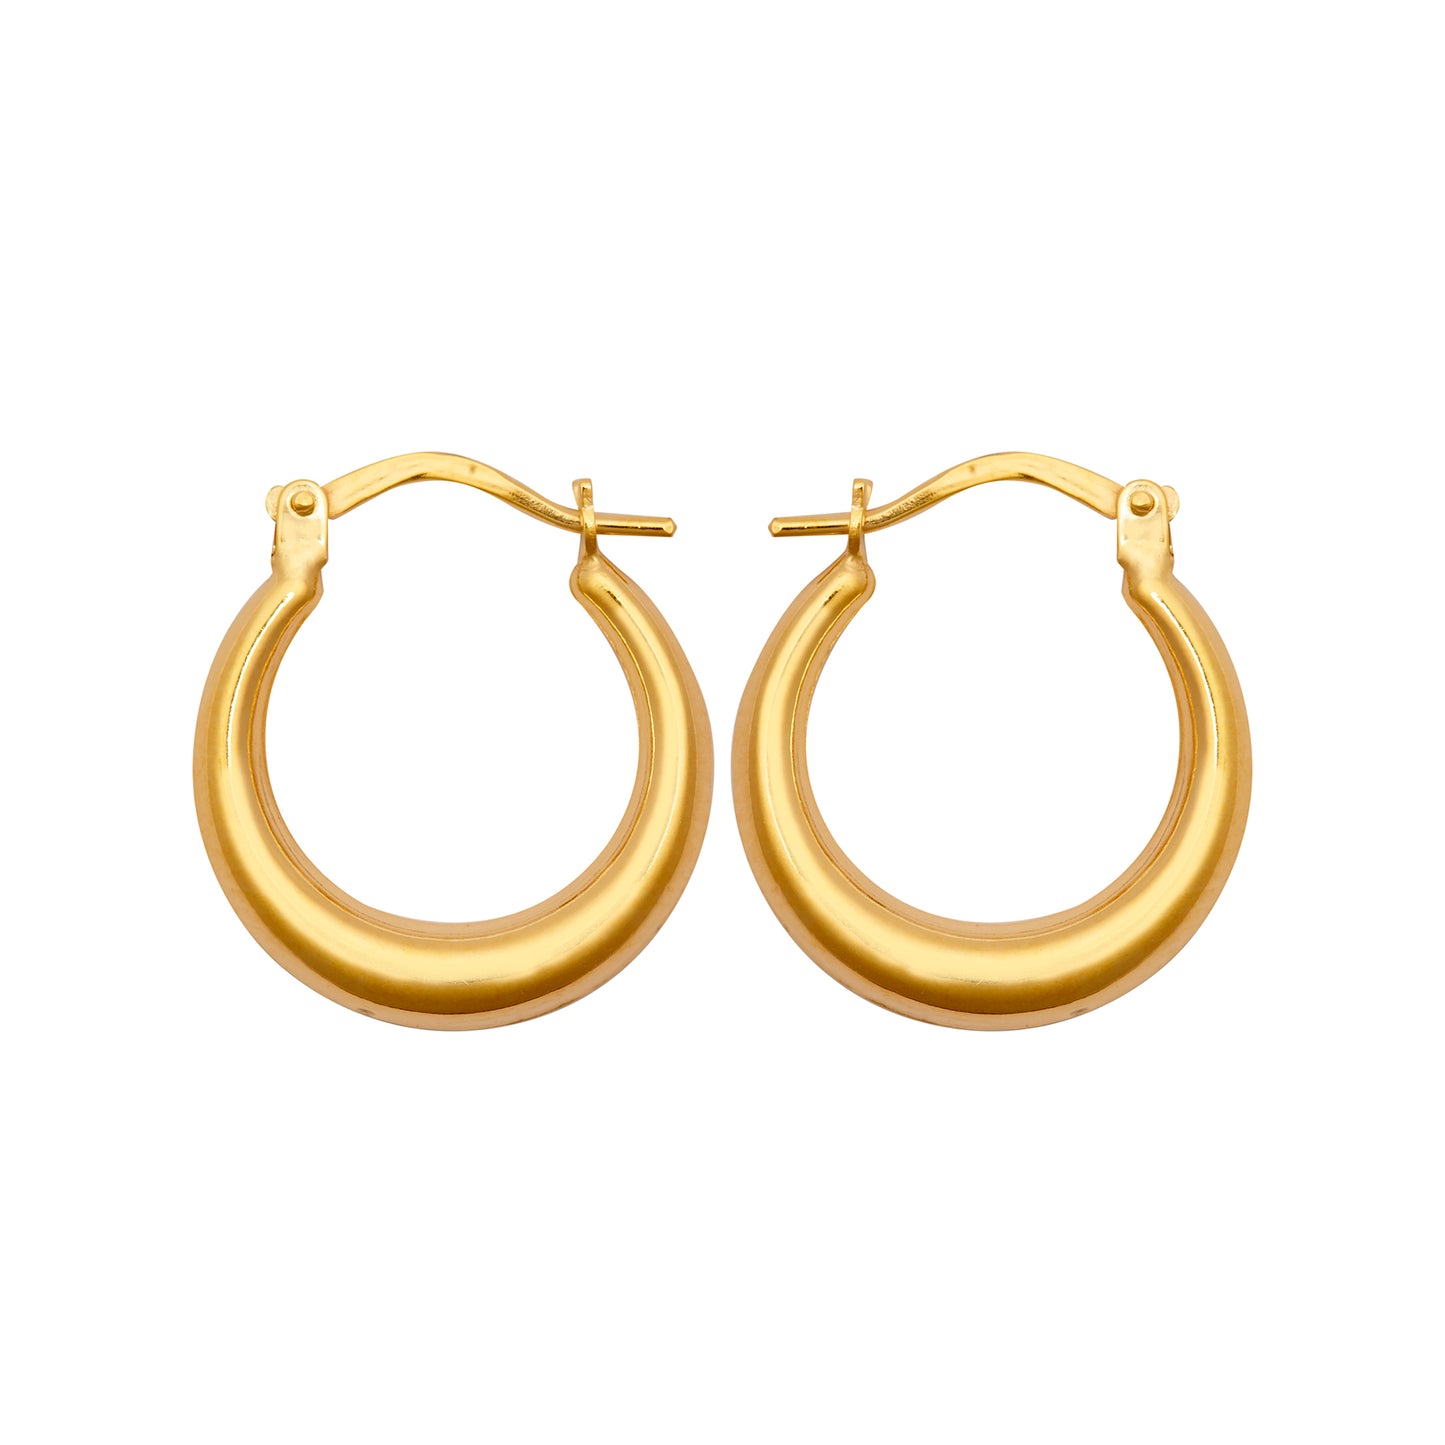 Ladies 9ct Gold  Graduating Crescent Moon Creole Earrings - JER792B